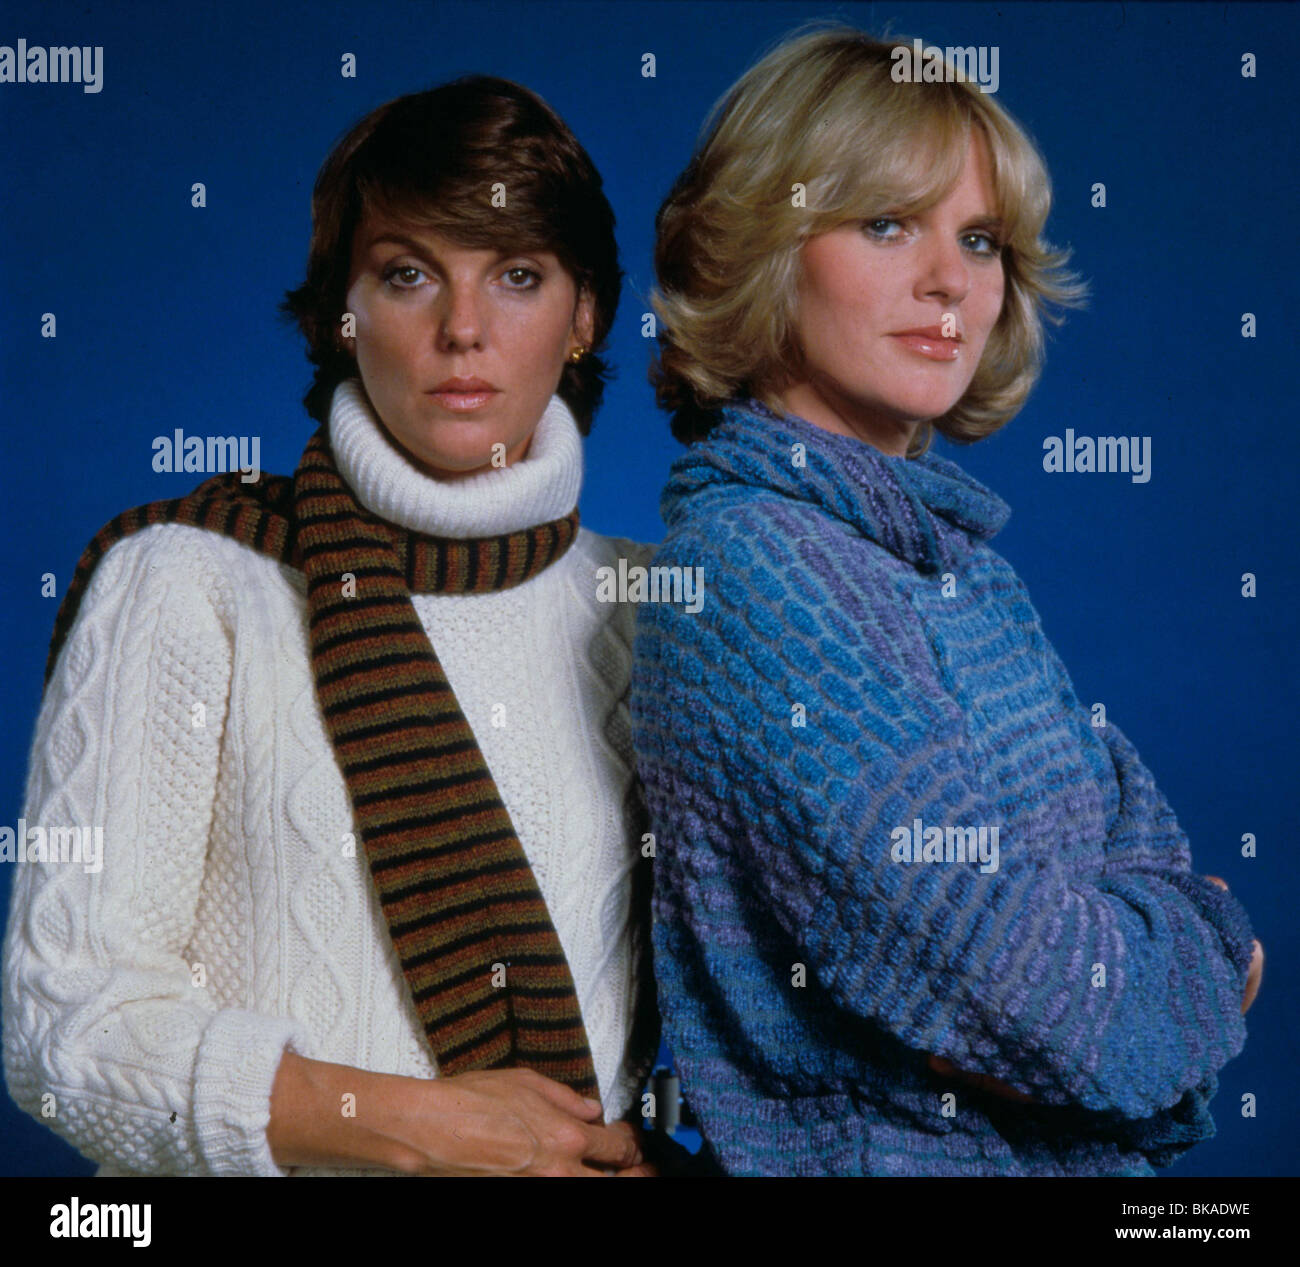 cagney-and-lacey-tv-tyne-daly-sharon-gless-cgl-033-BKADWE.jpg